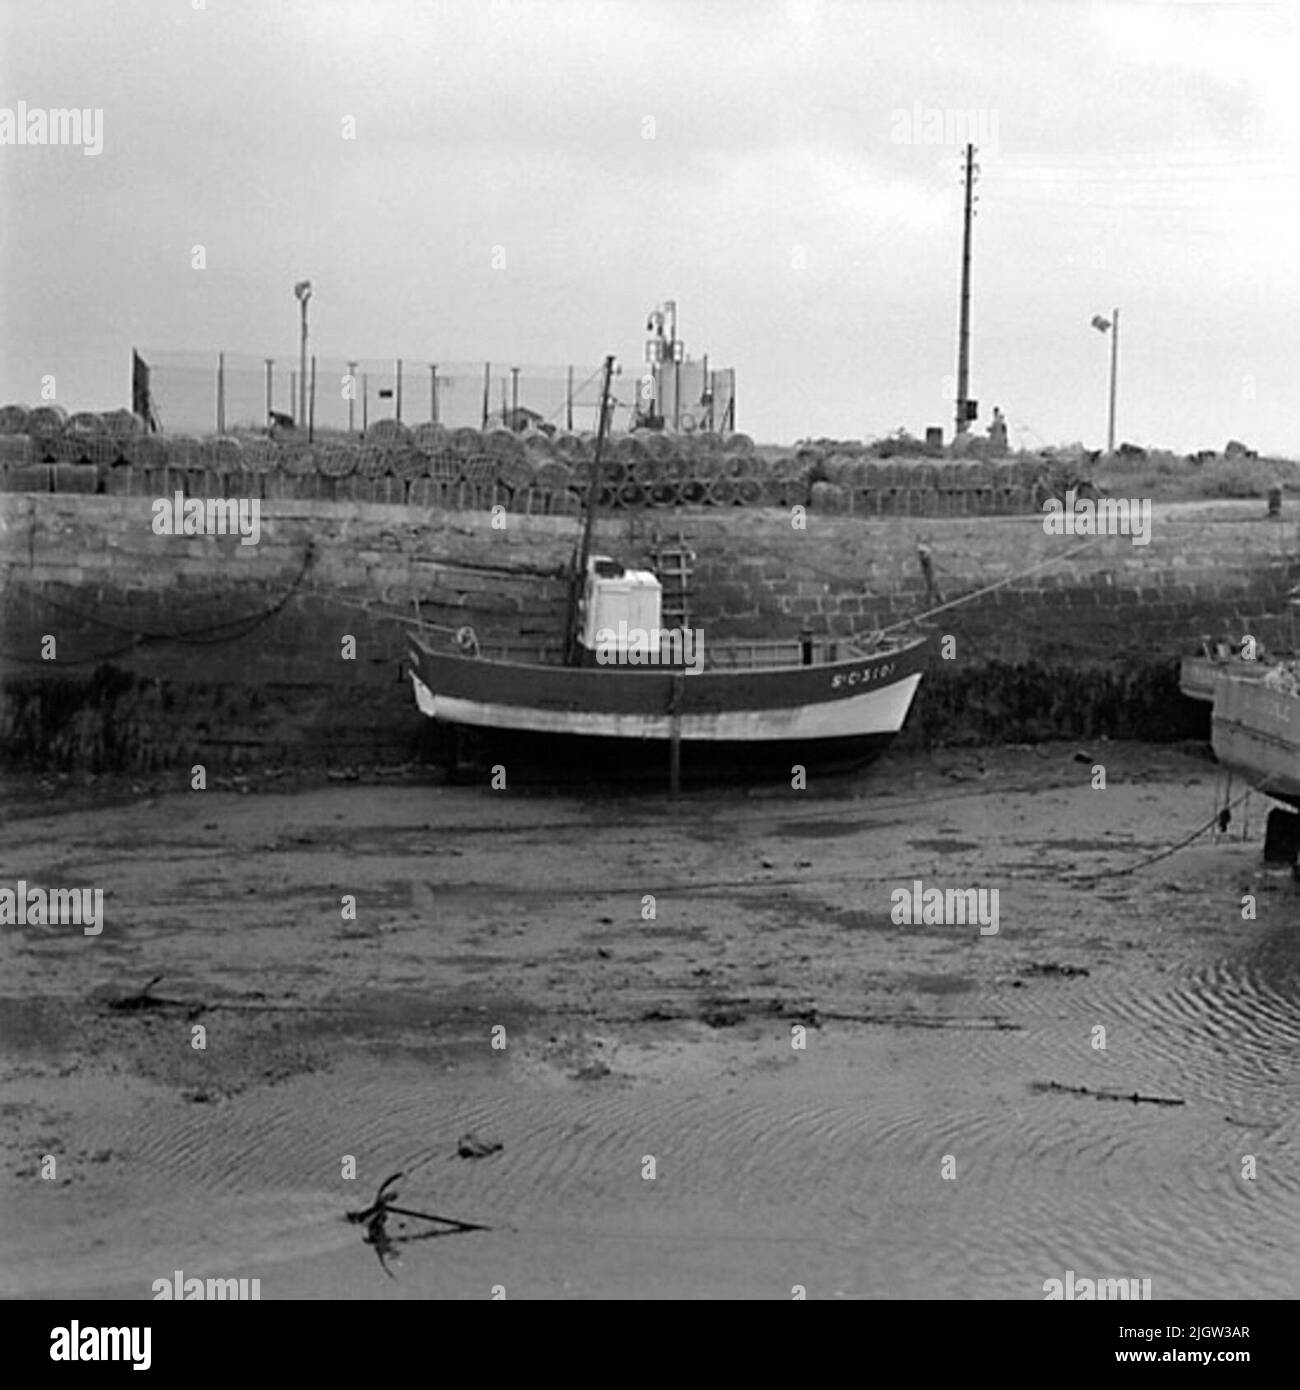 7. France. Photo journal is available at B.M.A. + Photo albums. Acquisition: Books and archive materials. Photos taken 1959-10-16.12 Pictures in series. According to notes: France. Atlantic coast, Le Croisic, 17/10 -59. Fishing boats in the harbor channel under EBB. In the background Hummertinor. Three boats are located in a harbor. It is low tide so they rest on the bottom of the harbor. On the quay there are cages used in fishing. Stock Photo